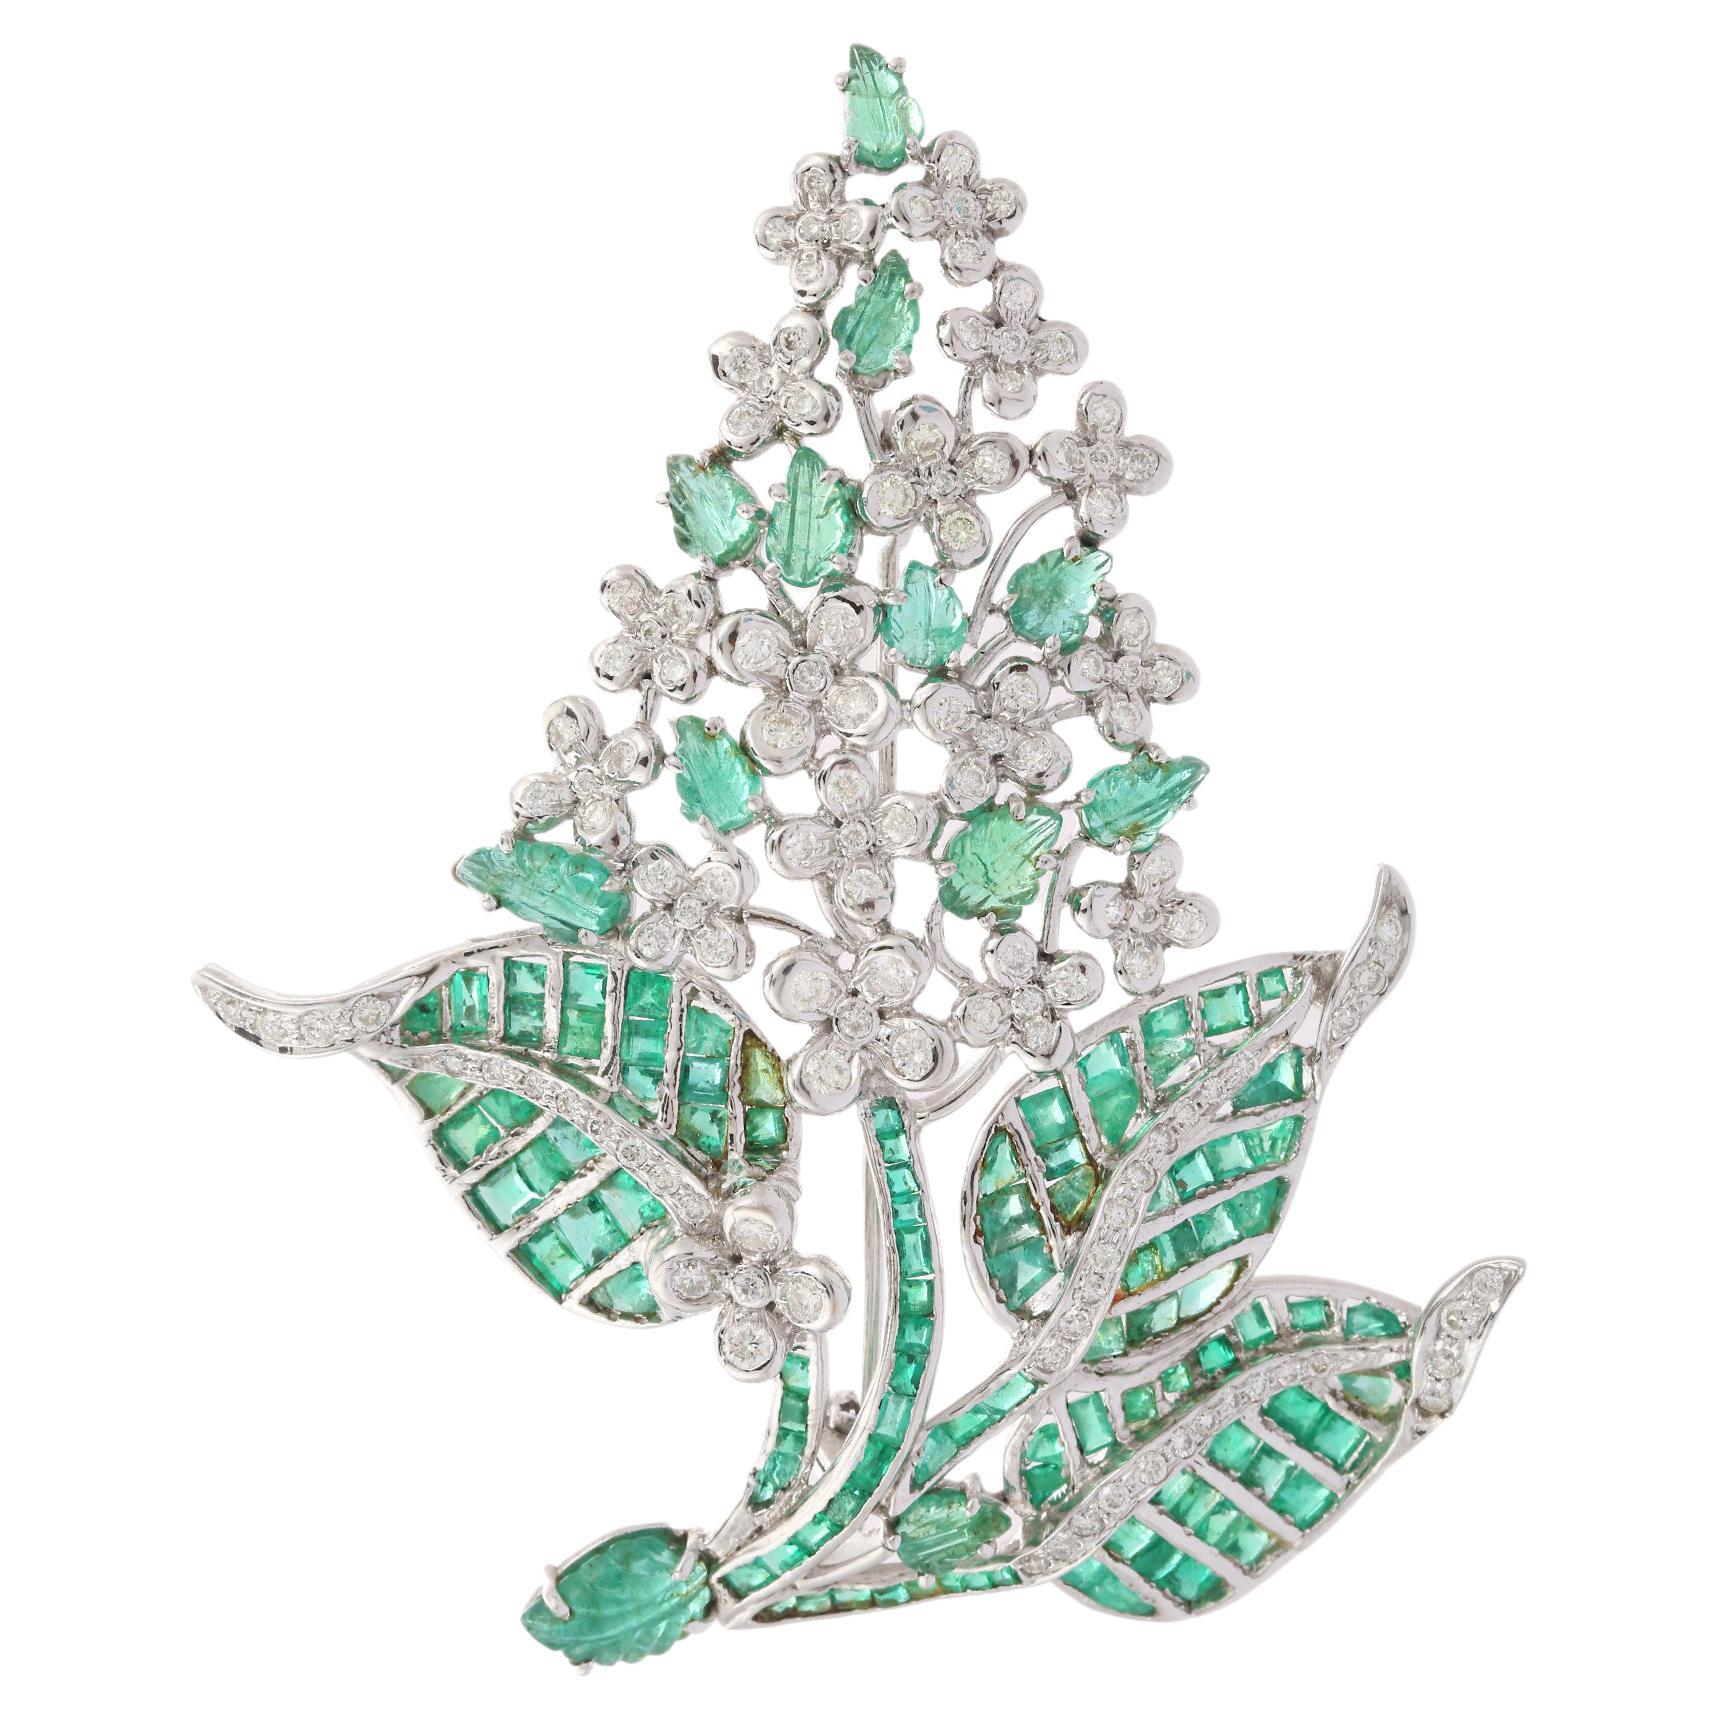 Emerald and Diamond Flower Brooch in 18K White Gold